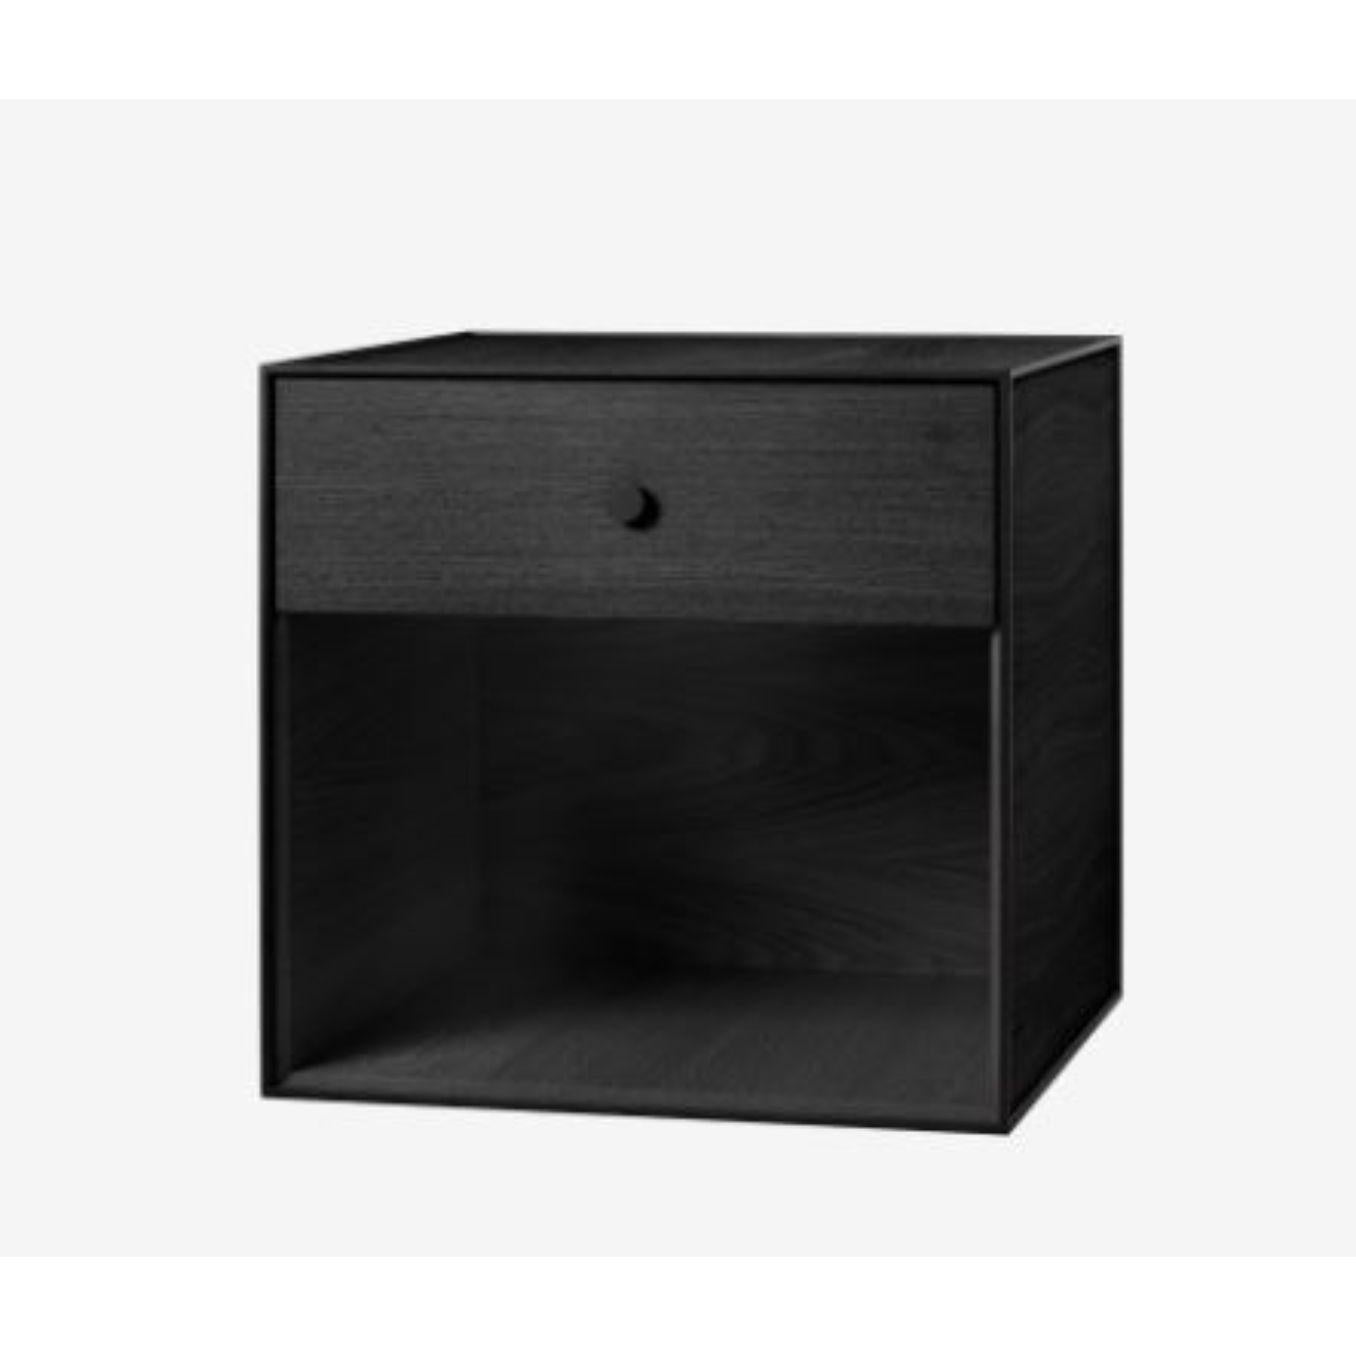 49 Fjord frame box with 1 drawer by Lassen
Dimensions: D 49 x W 42 x H 49 cm 
Materials: finér, melamin, melamin, melamine, metal, veneer
Also available in different colours and dimensions. 
Weight: 15 Kg.


By Lassen is a Danish design brand